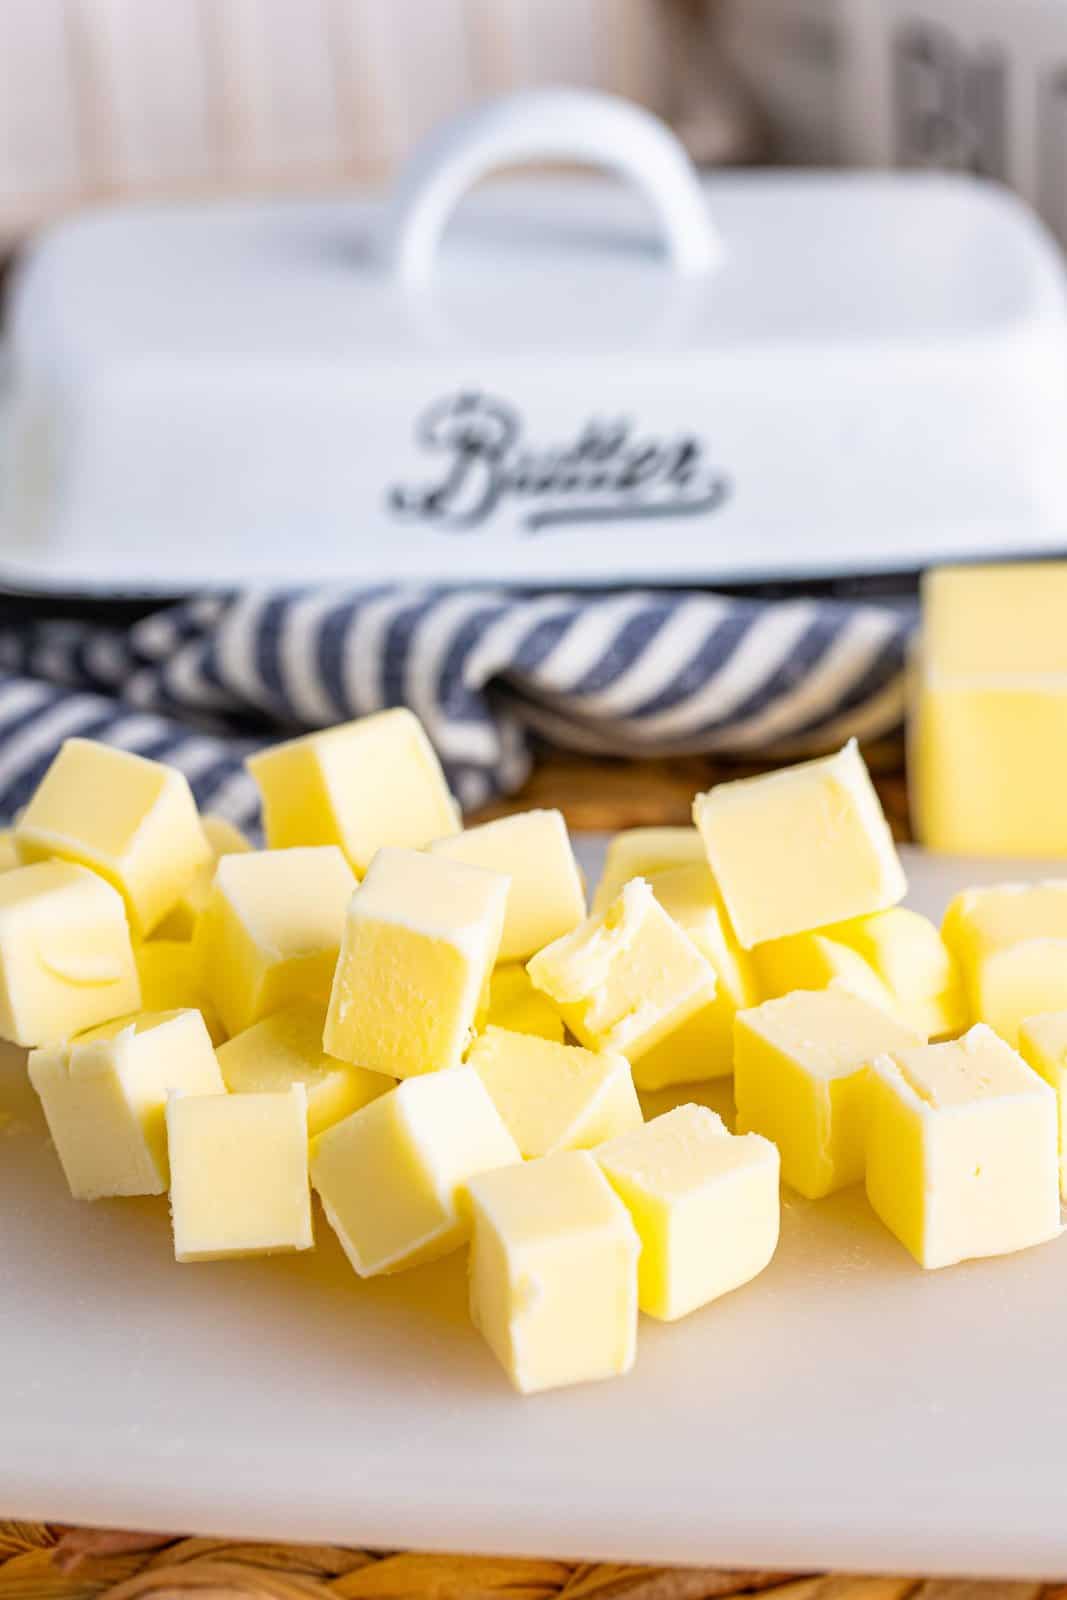 Cubed up pieces of butter so it can soften faster.